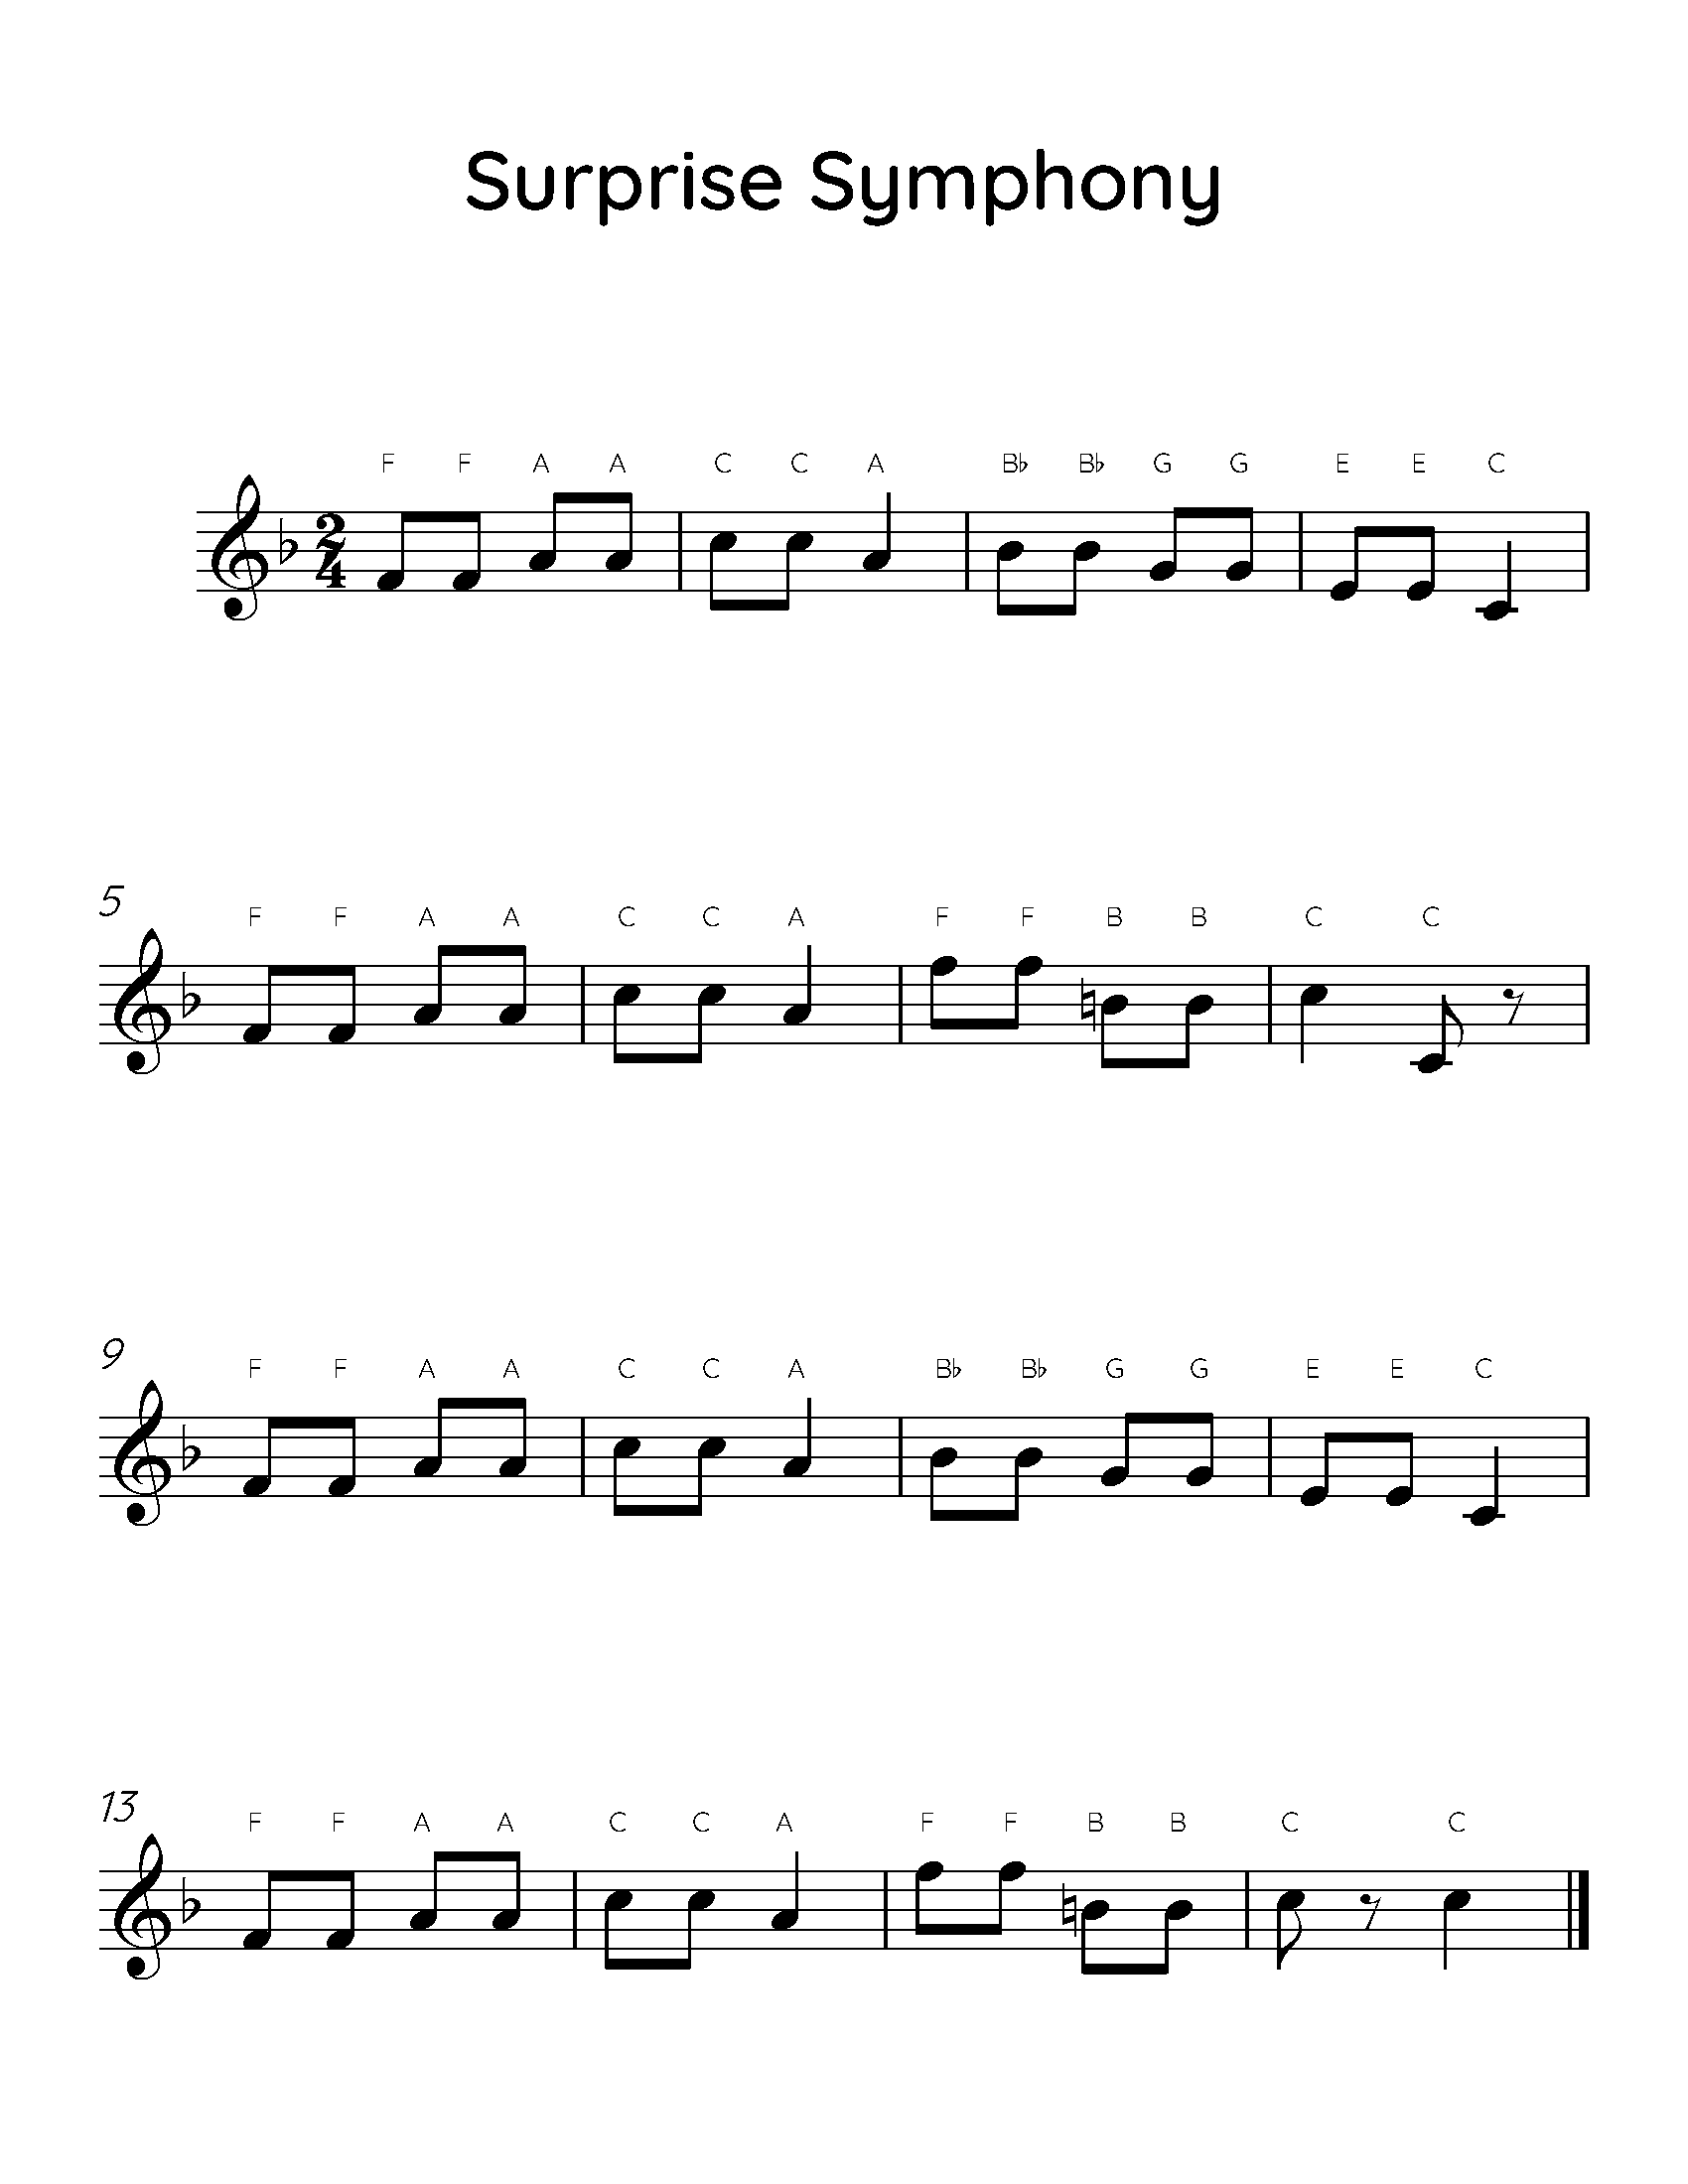 Surprise Symphony - Easy Piano Sheet Music